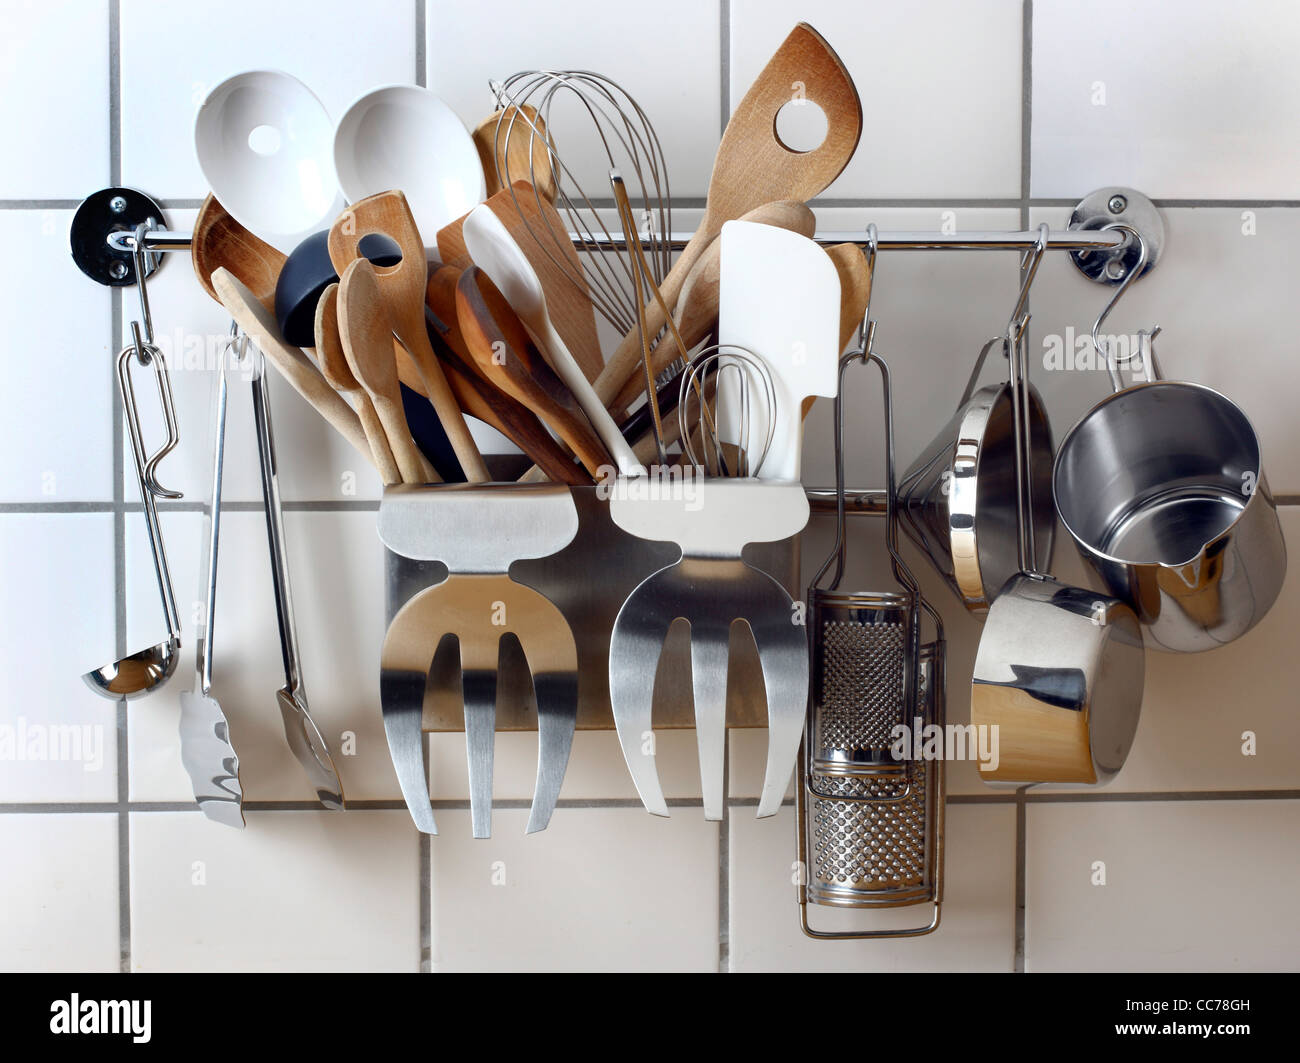 Various kitchen utensils, kitchen tools, hanging at a kitchen wall rack. Stock Photo